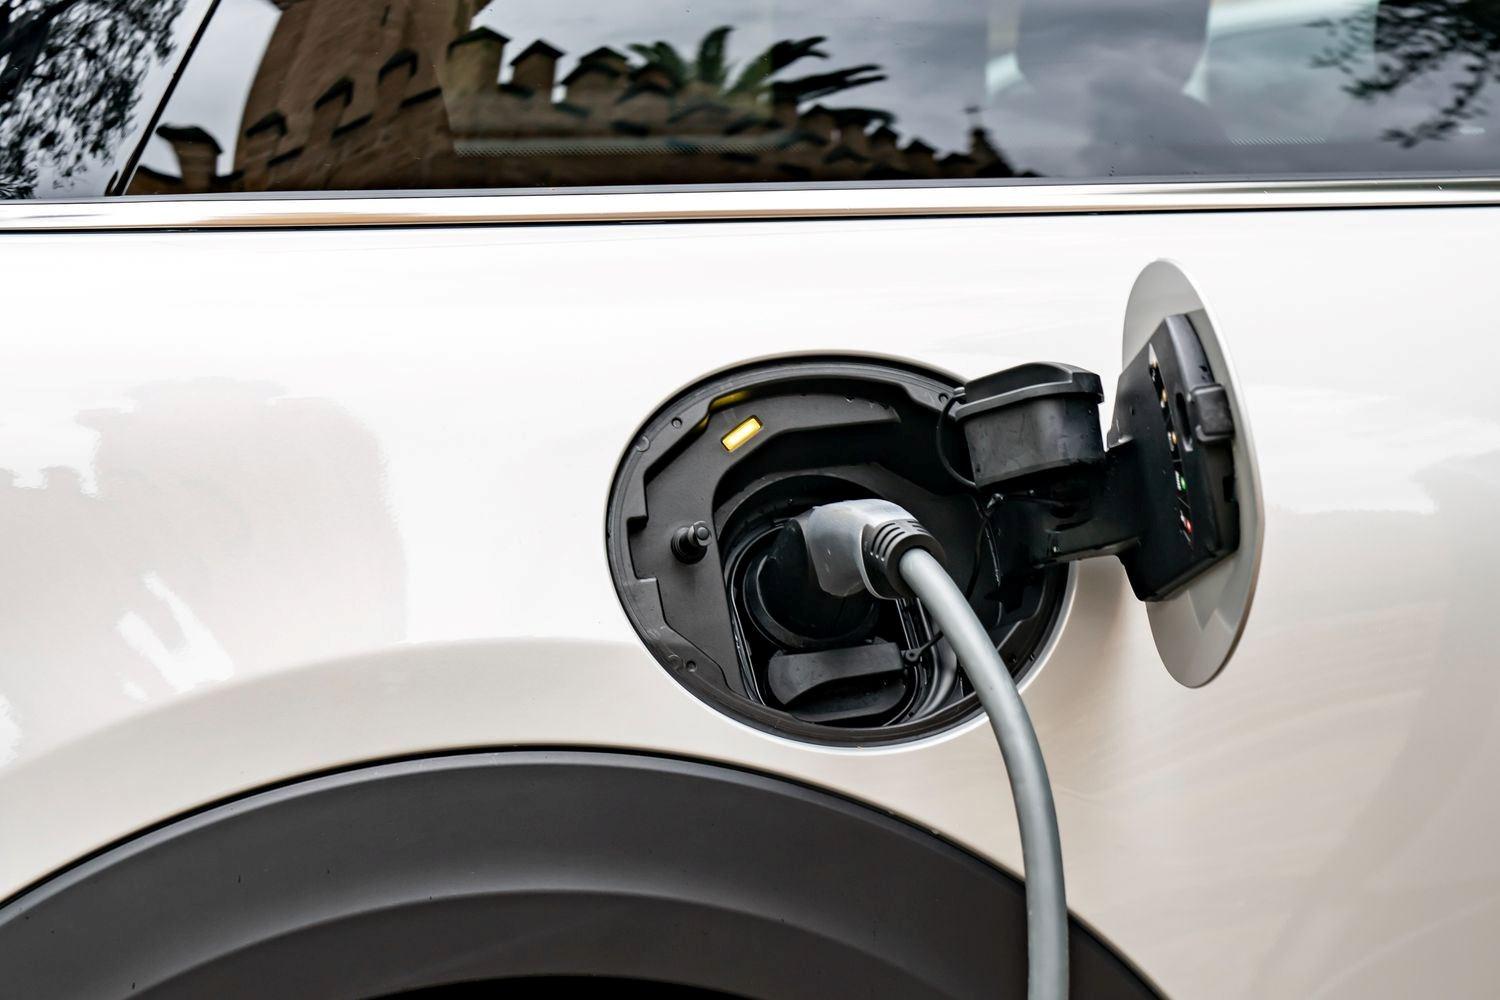 Exterior view of the new MINI Electric in white, close-up of the electric charging socket with charging cable plugged in